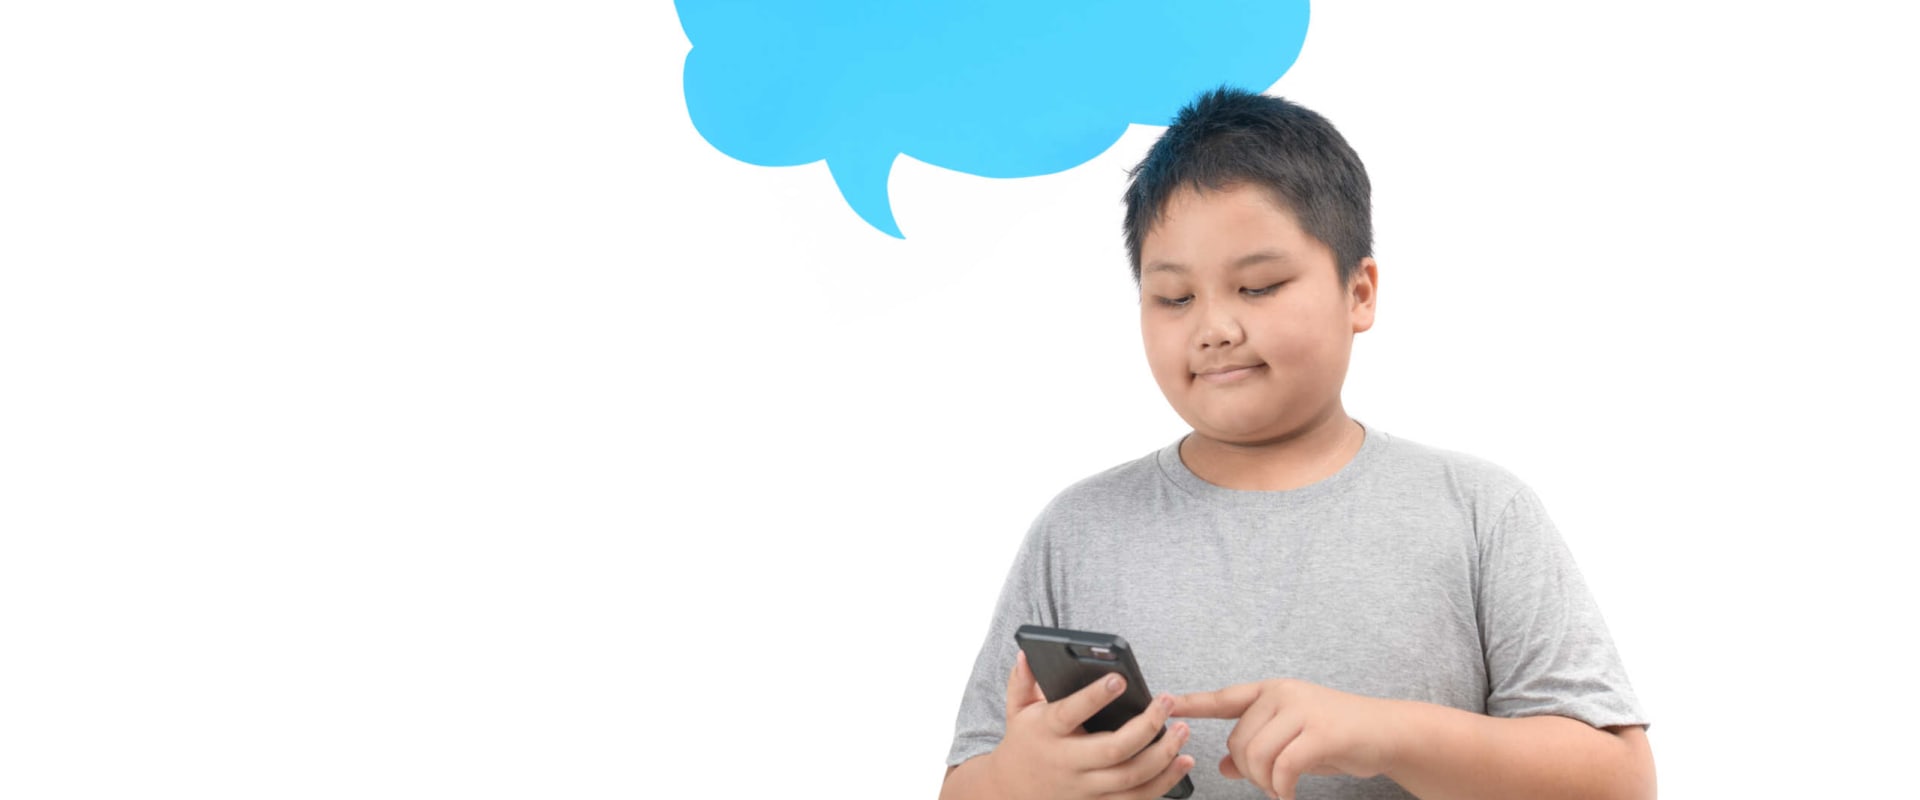 What is speech therapy app?